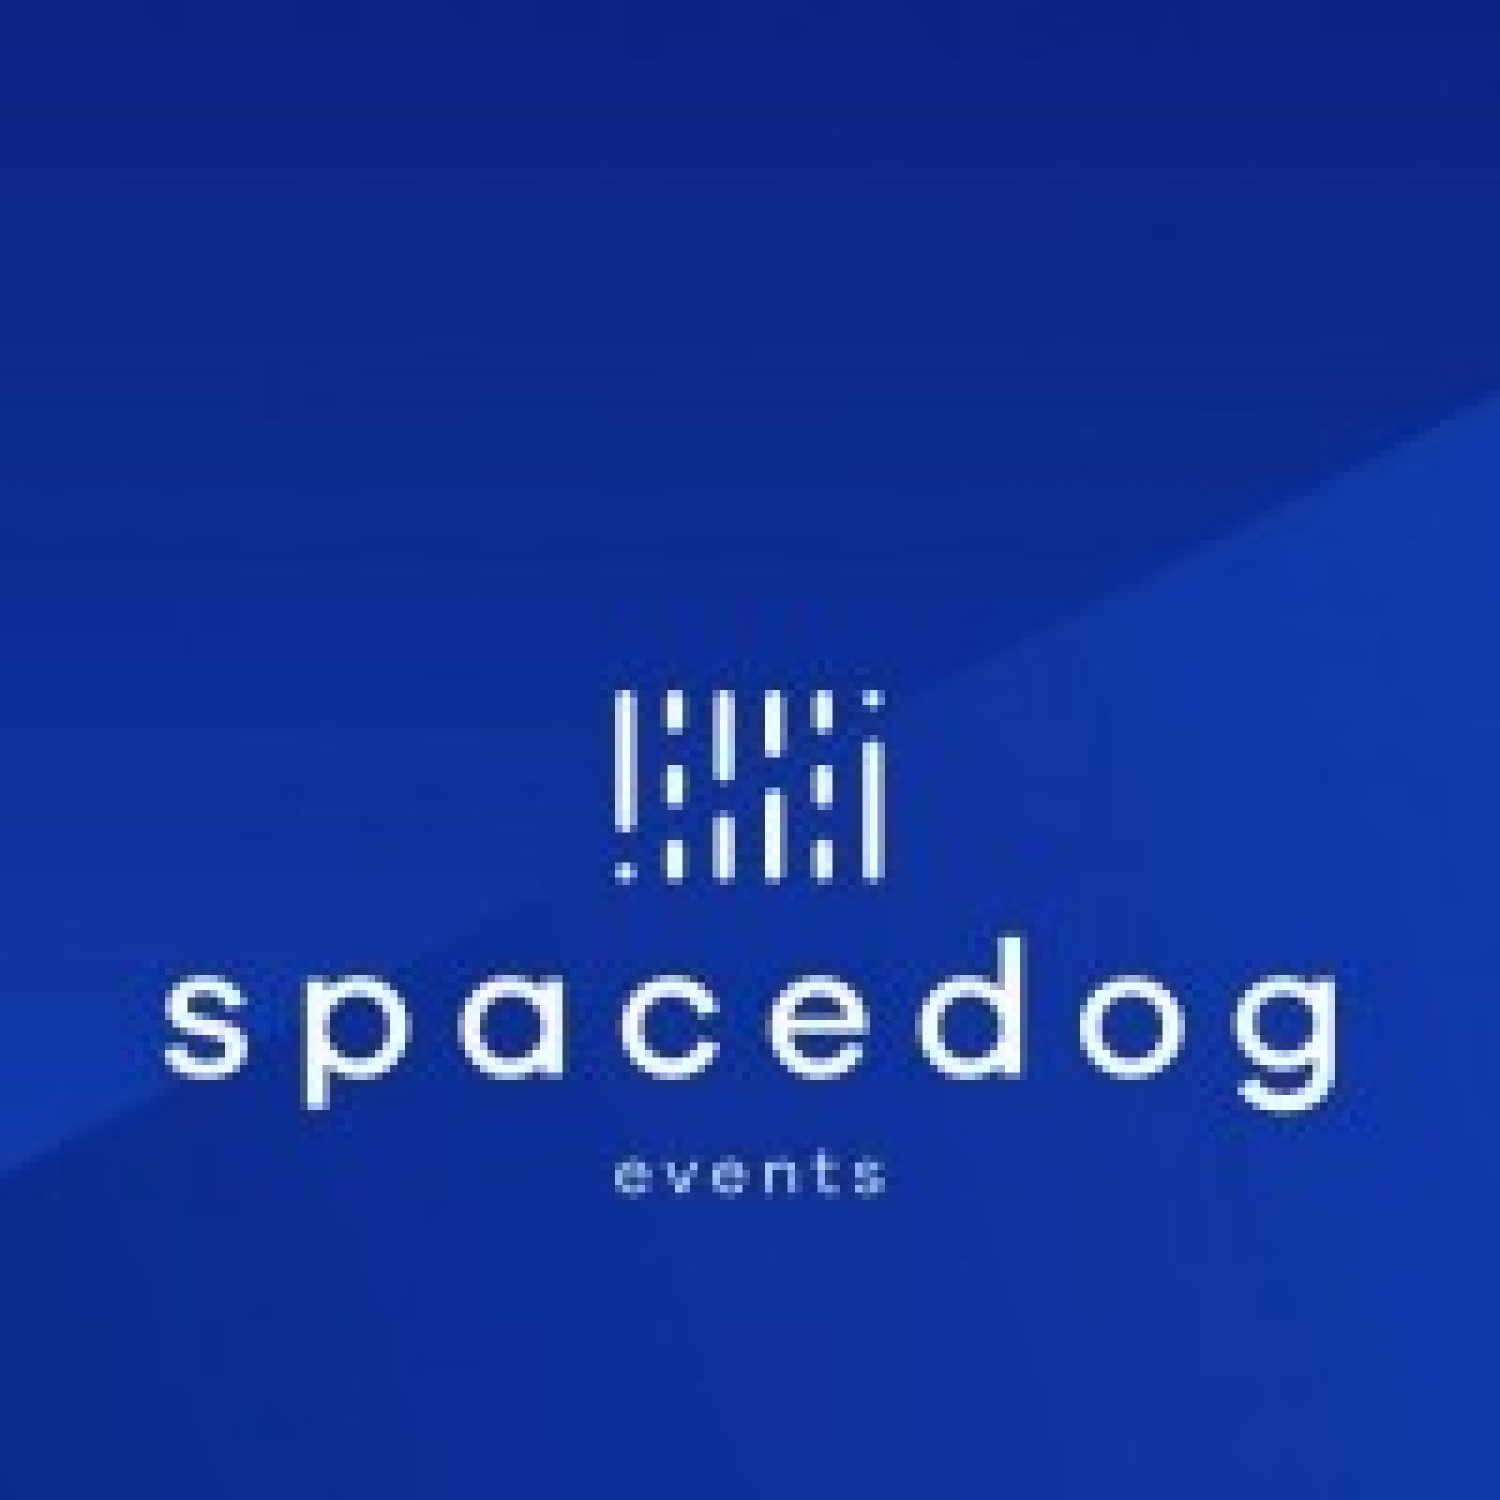 SpaceDog Events